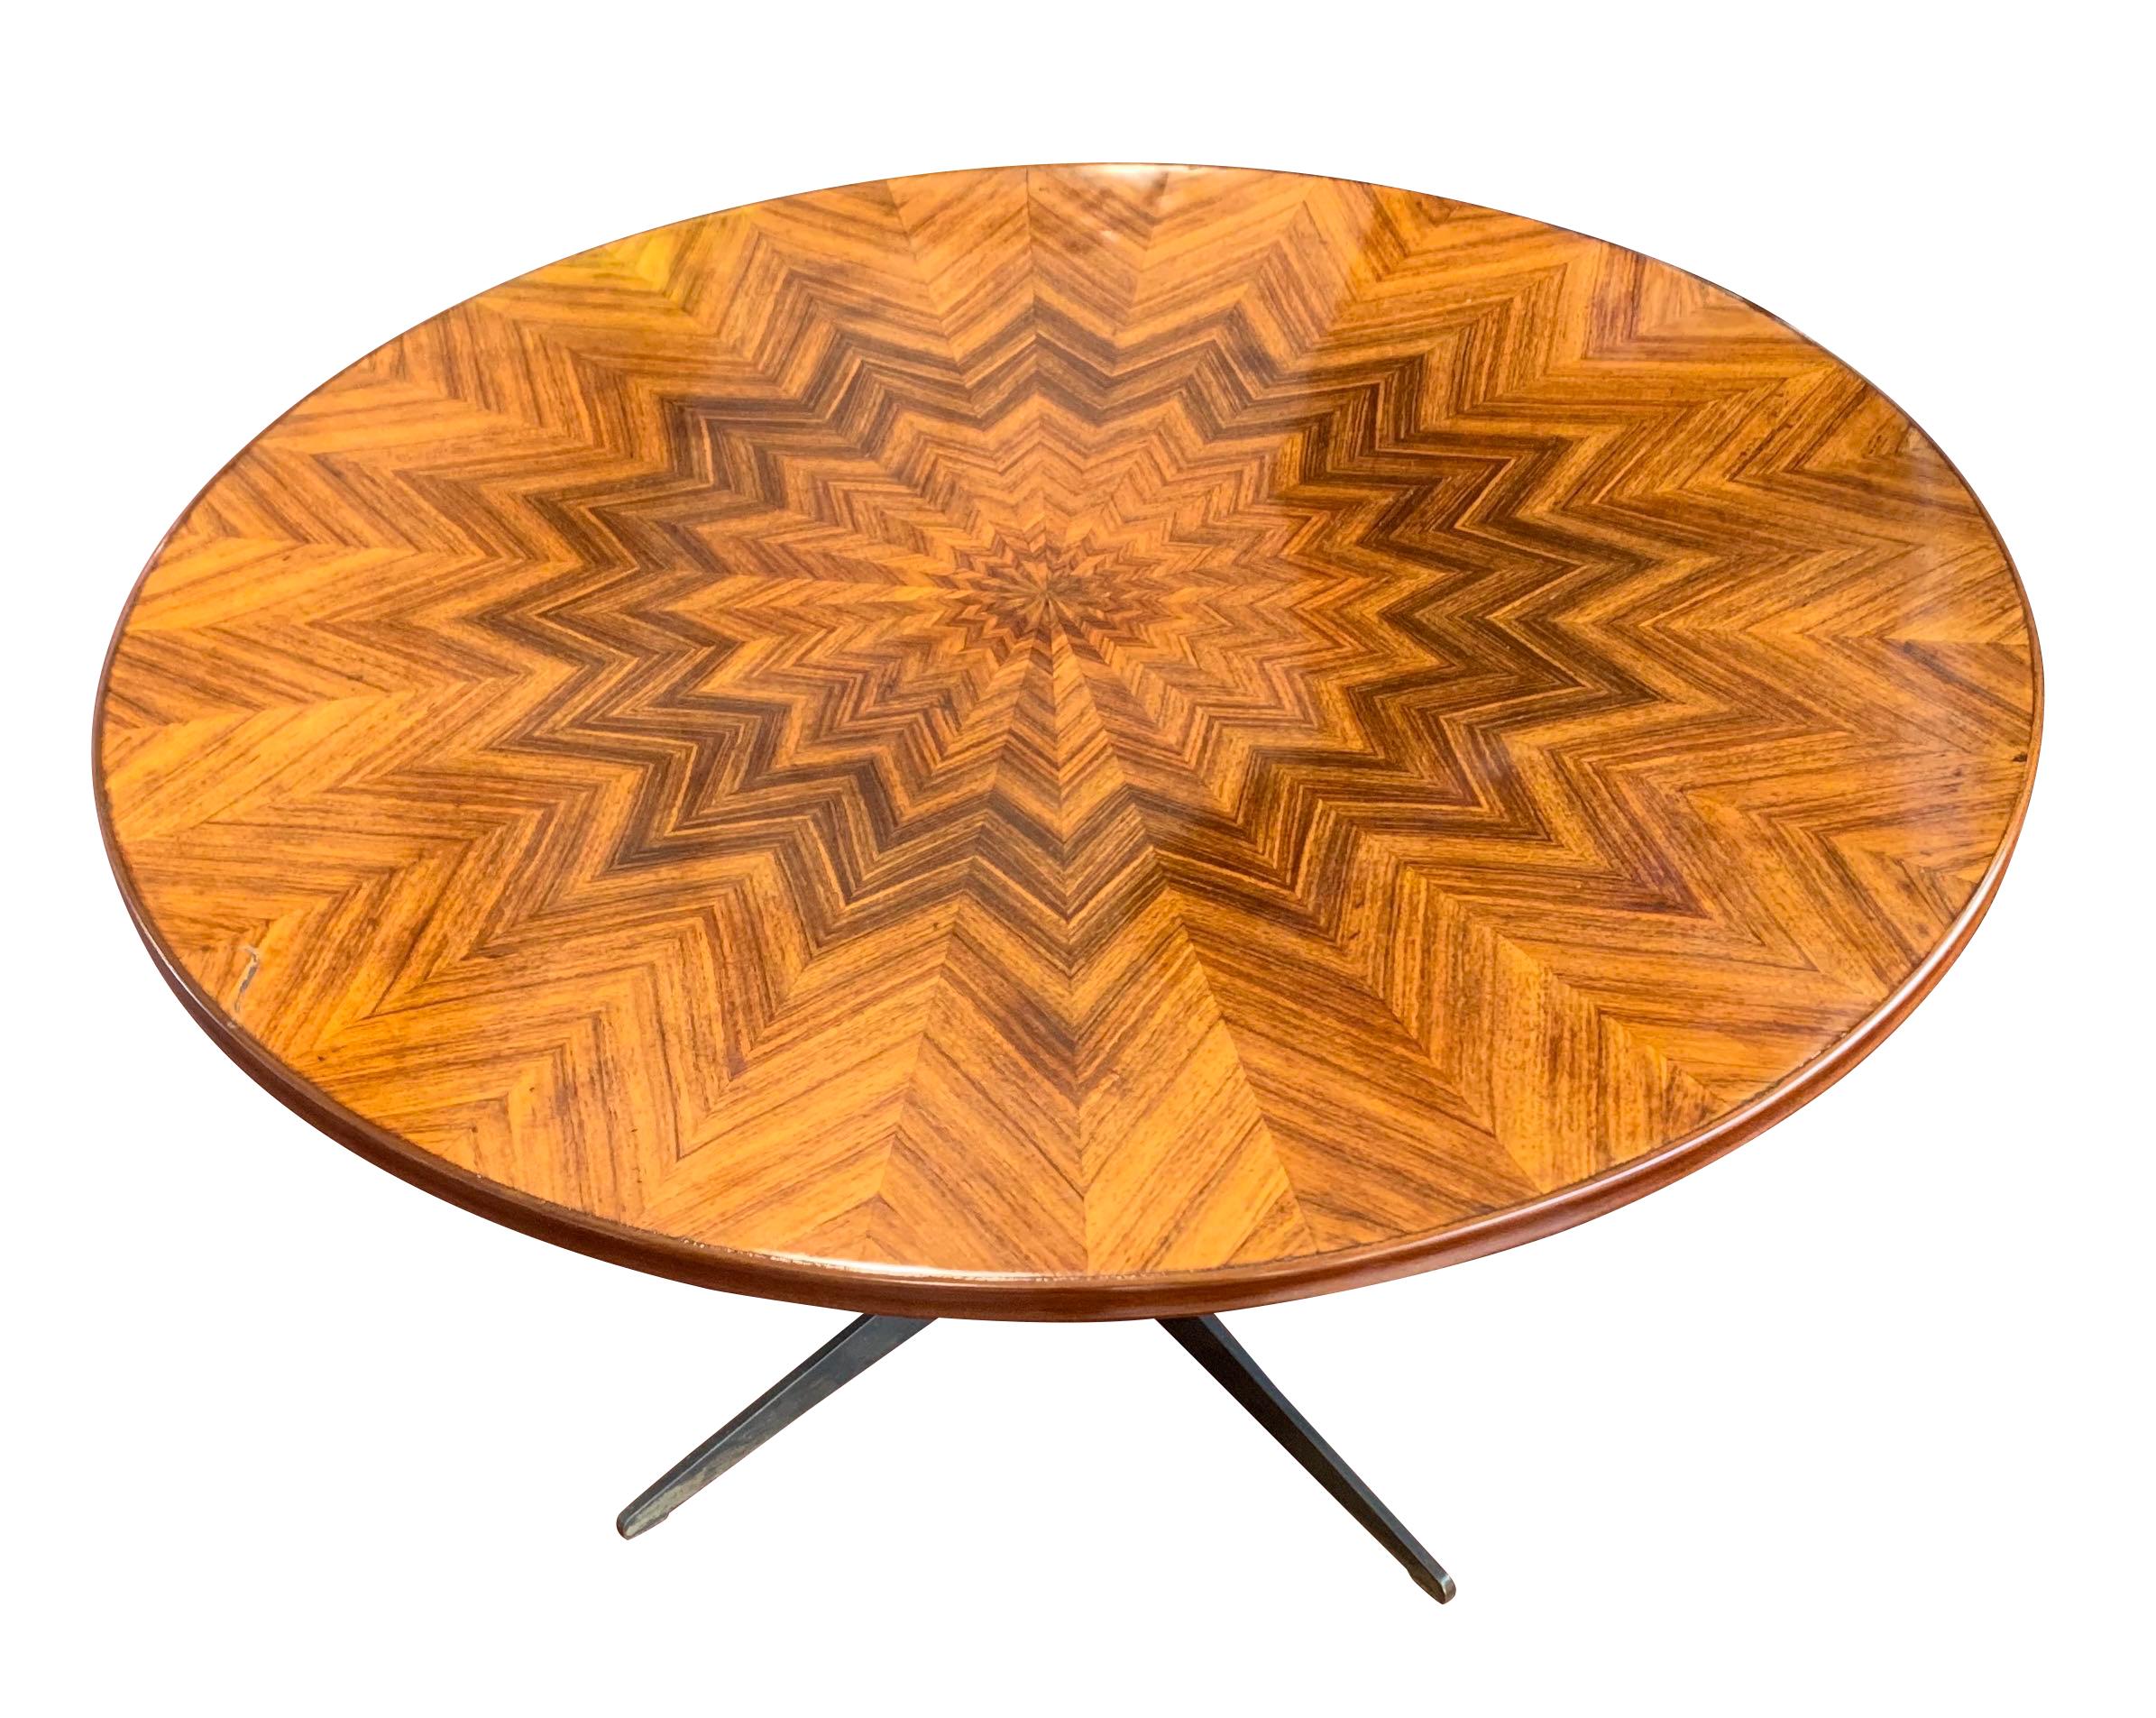 Midcentury Italian table made of a high polish zig zag rosewood
Beautiful patterned top
Steel legs with adjustable brass base
Can be lowered to coffee table height, and adjusted to either side table and/or dining table height
Measures: Lowest